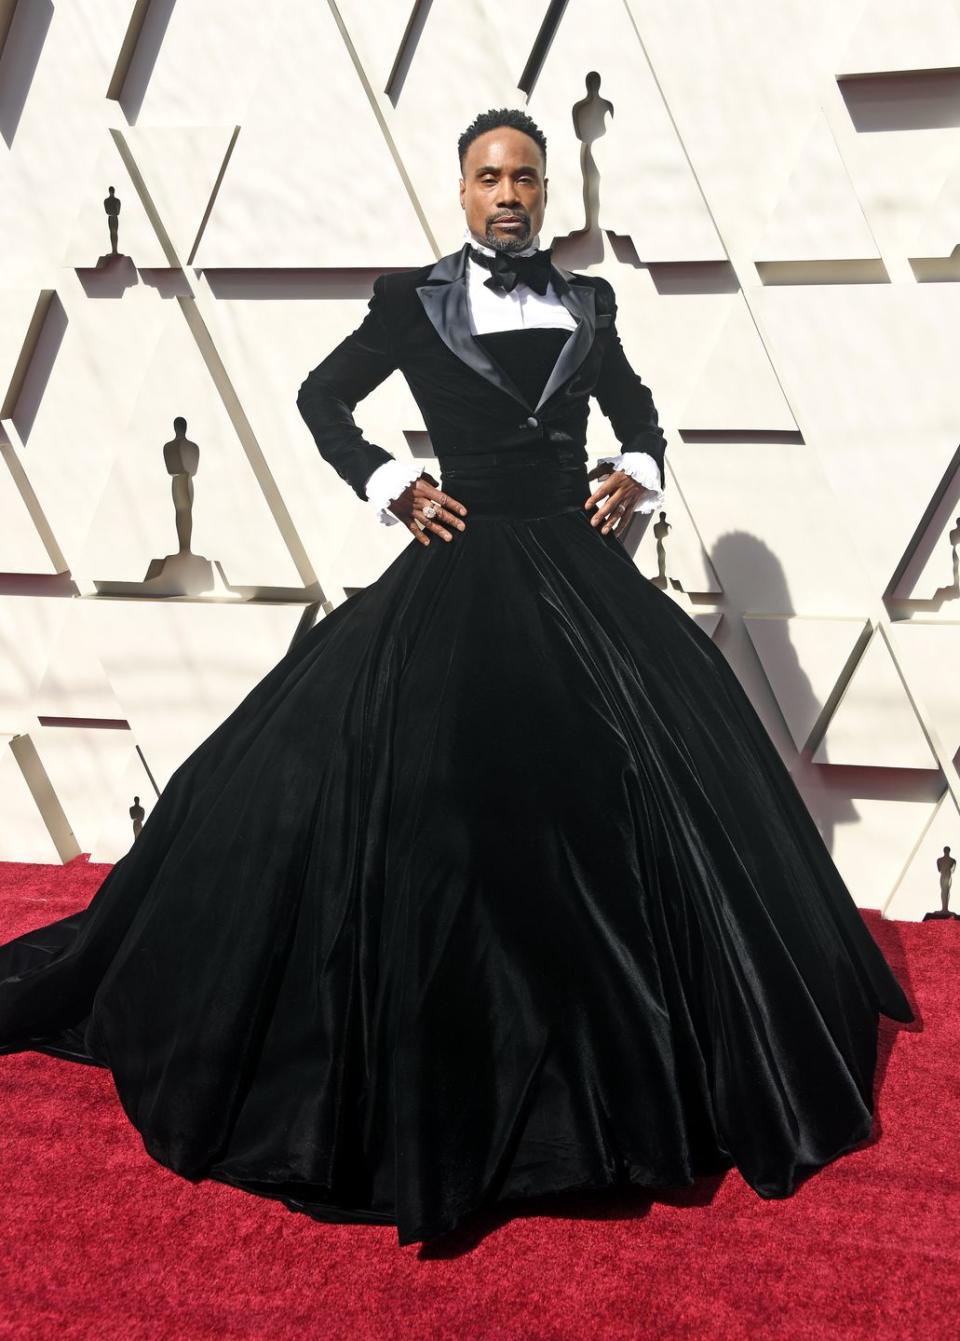 42) Billy Porter at the Academy Awards, February 2019